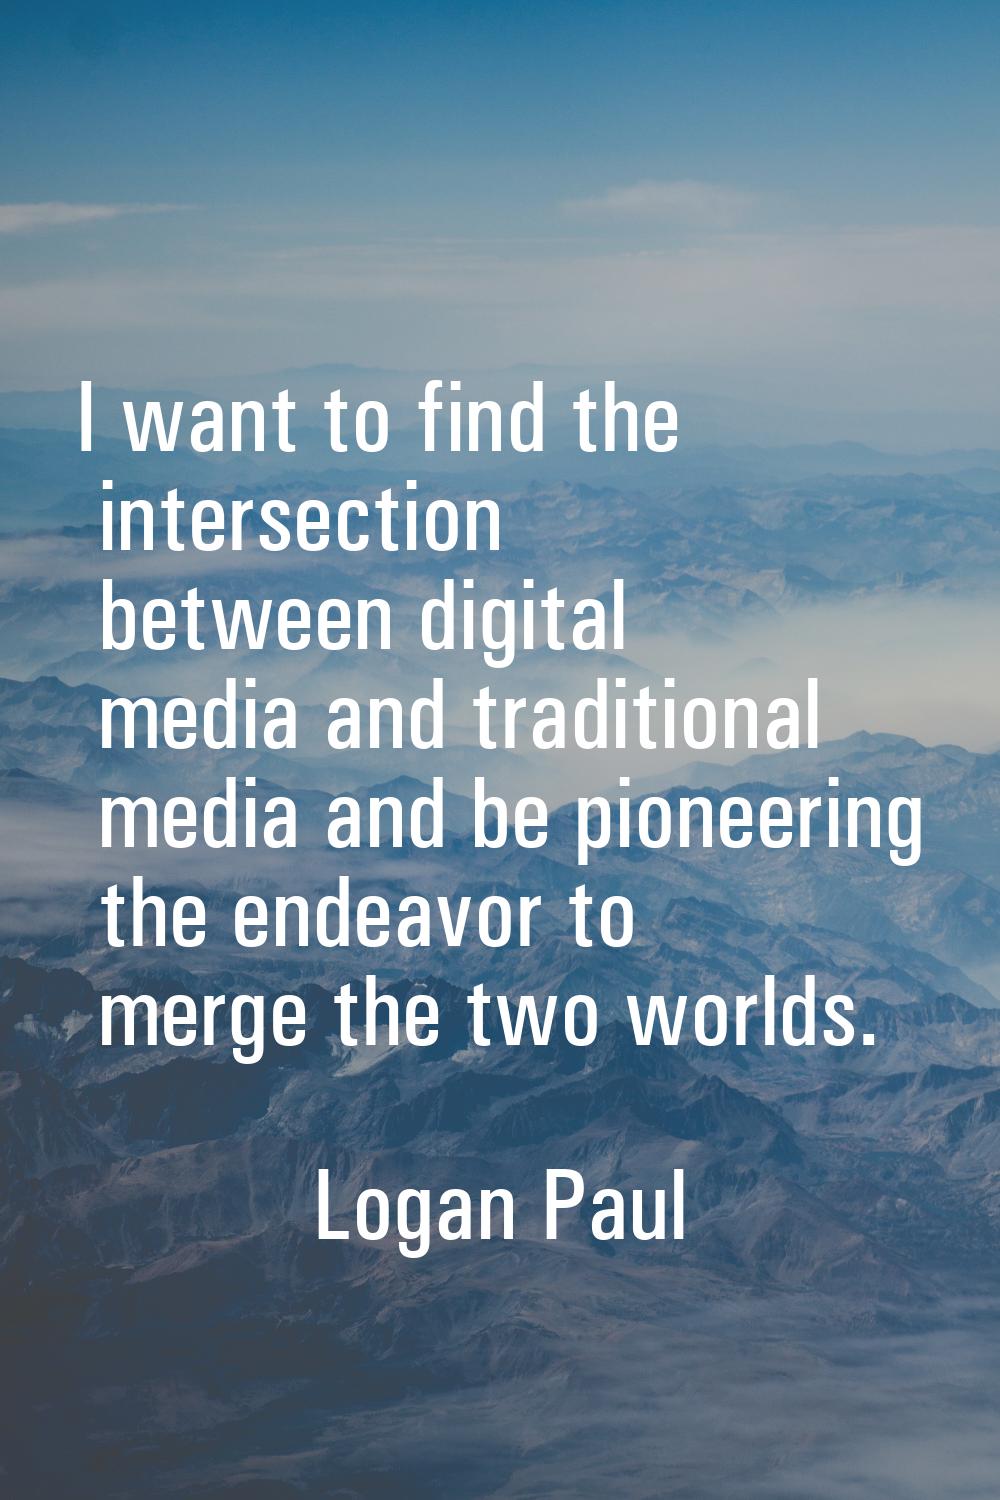 I want to find the intersection between digital media and traditional media and be pioneering the e